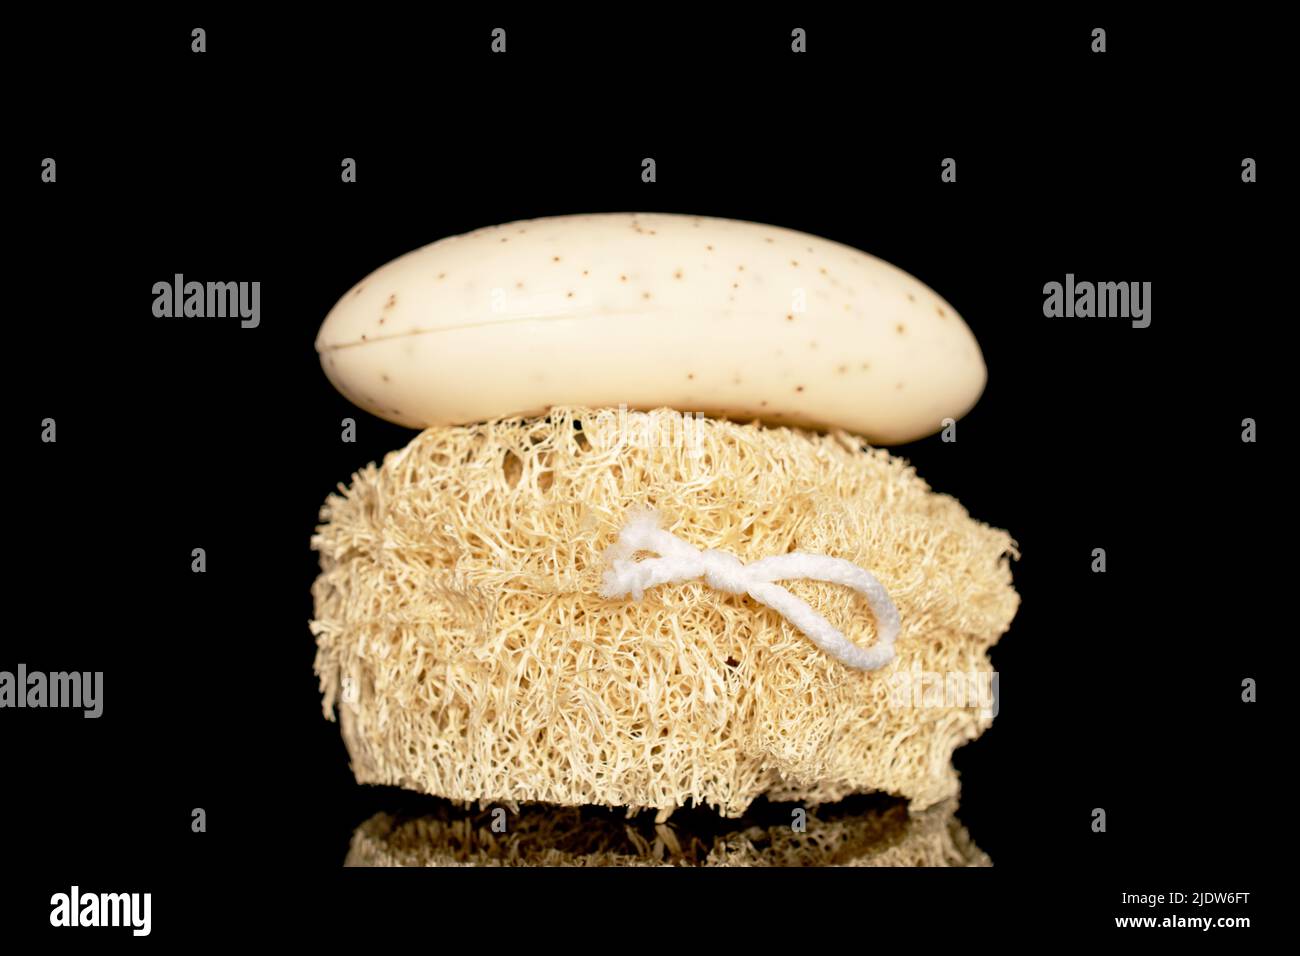 One loofah shower sponge and one bar of soap, close-up, isolated on a black background. Stock Photo